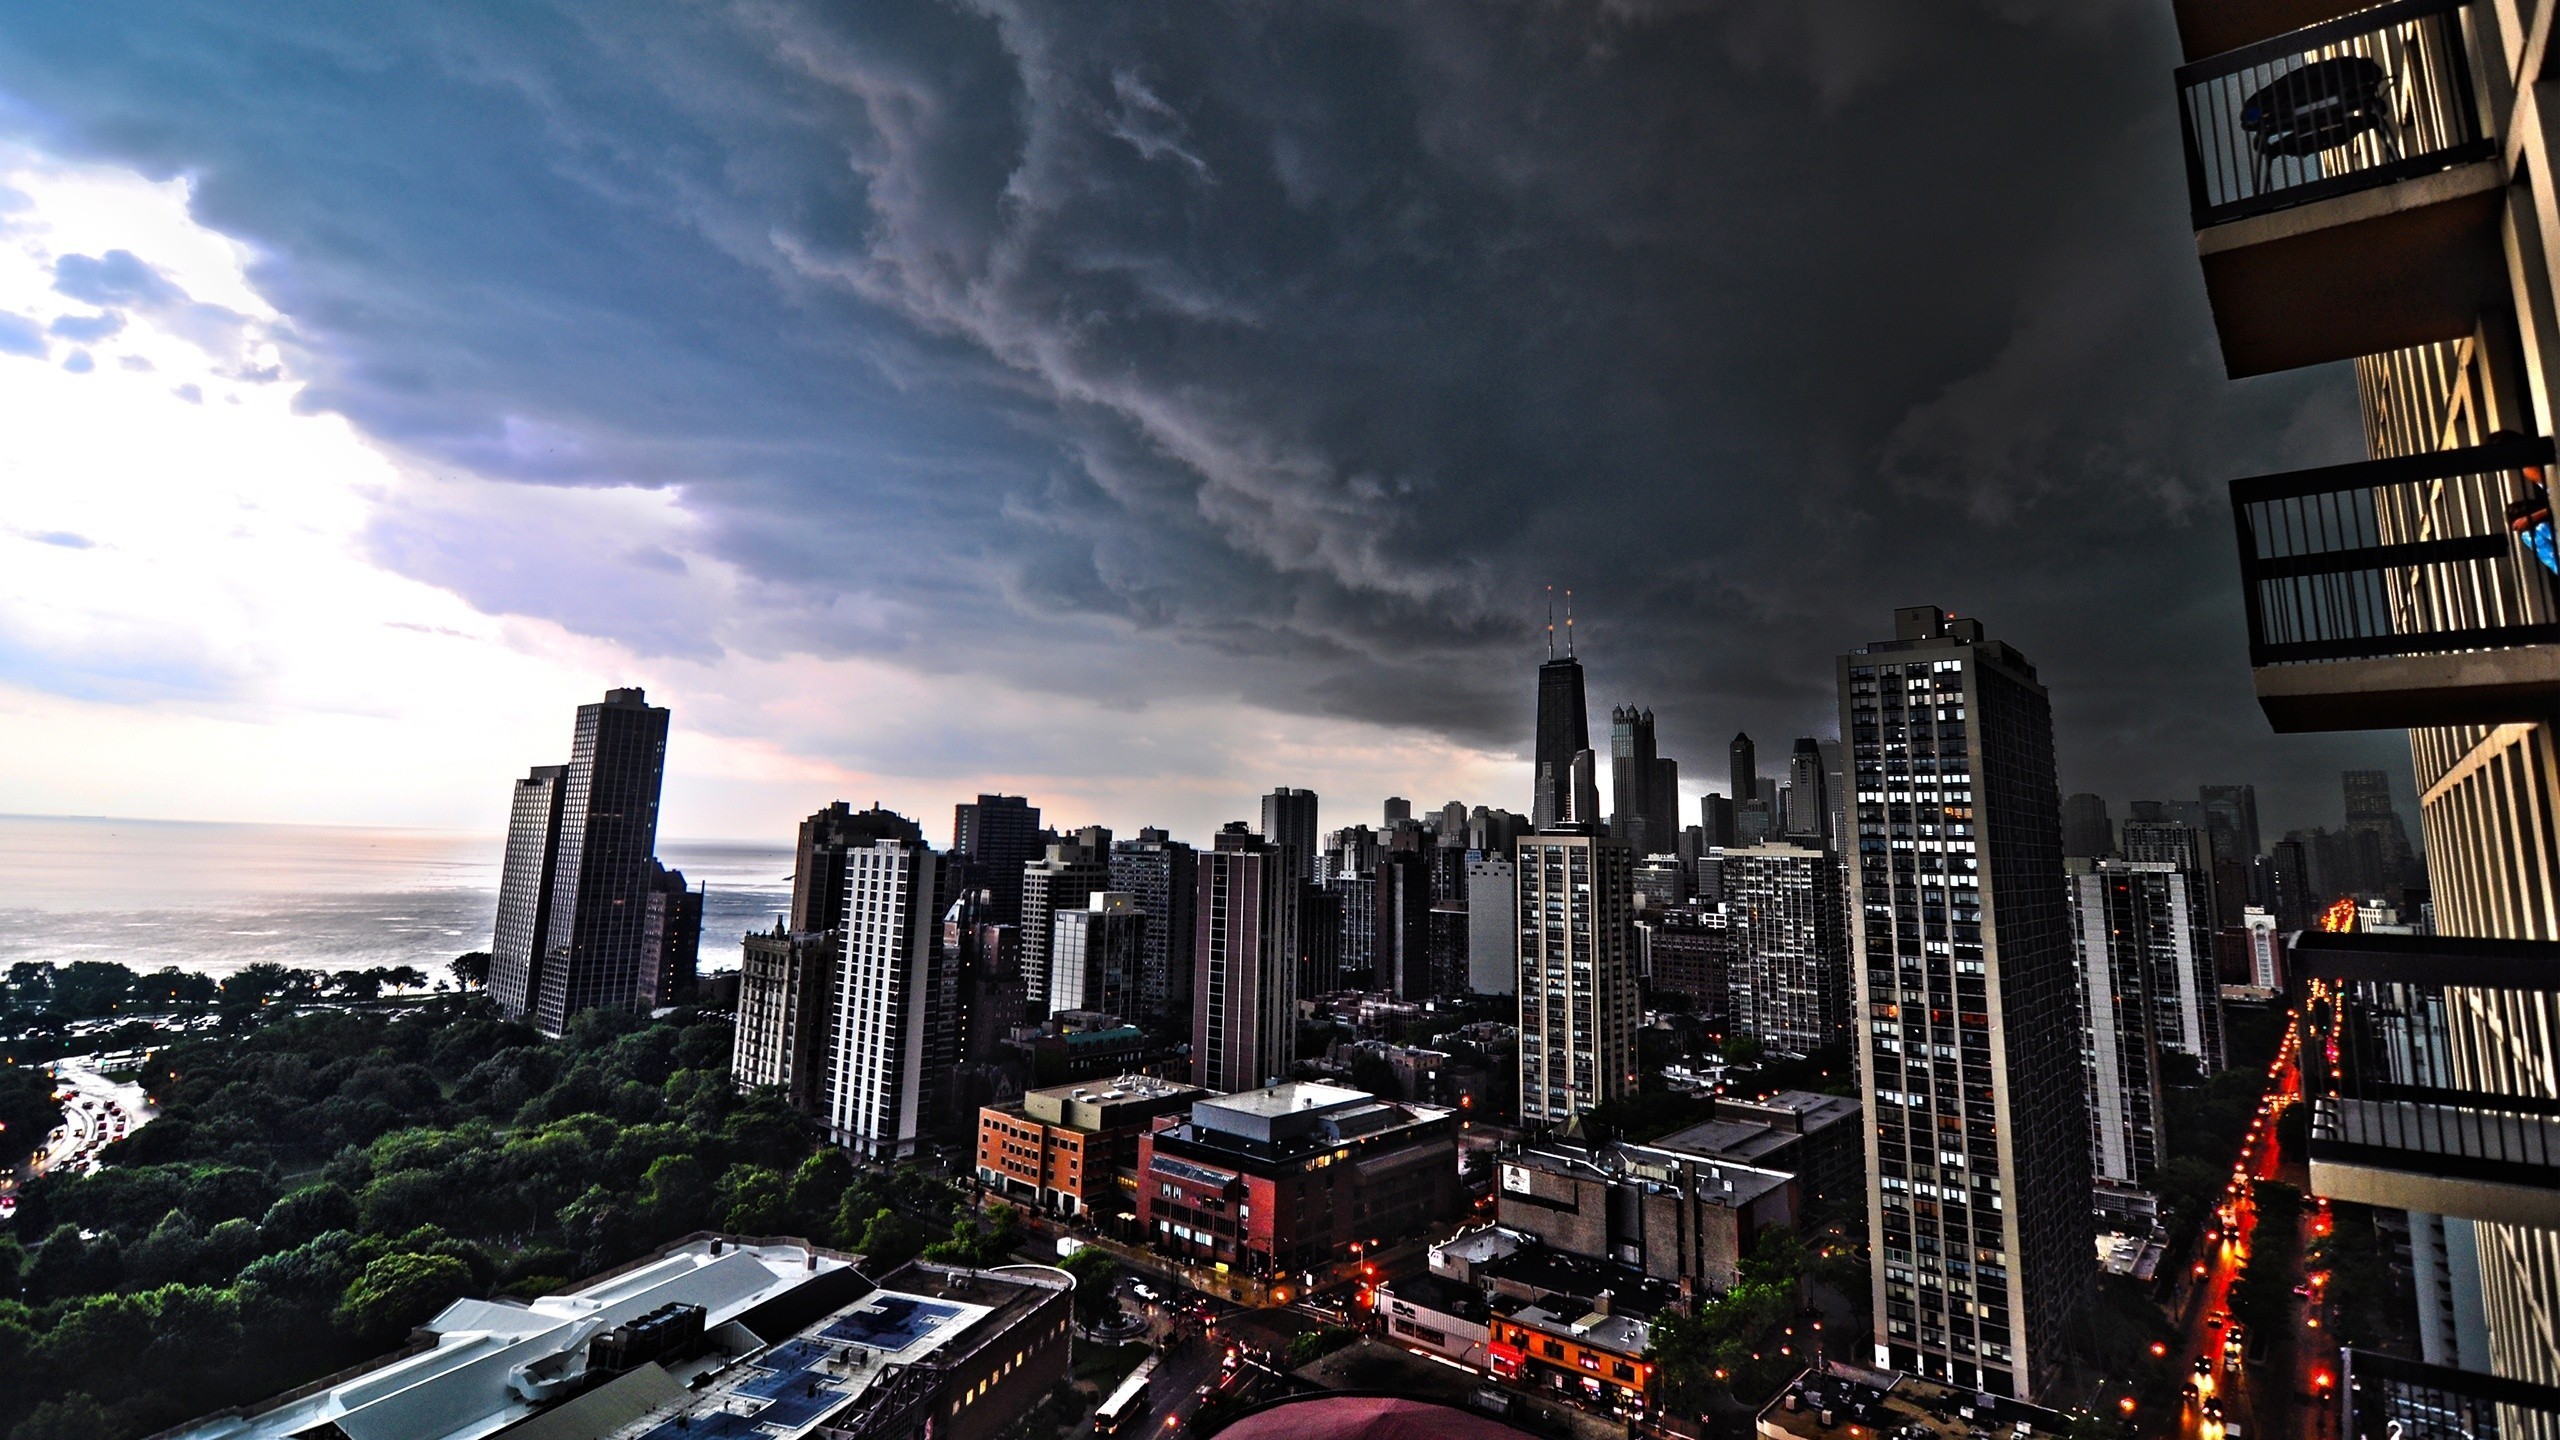 General 2560x1440 cityscape clouds storm Chicago USA sky